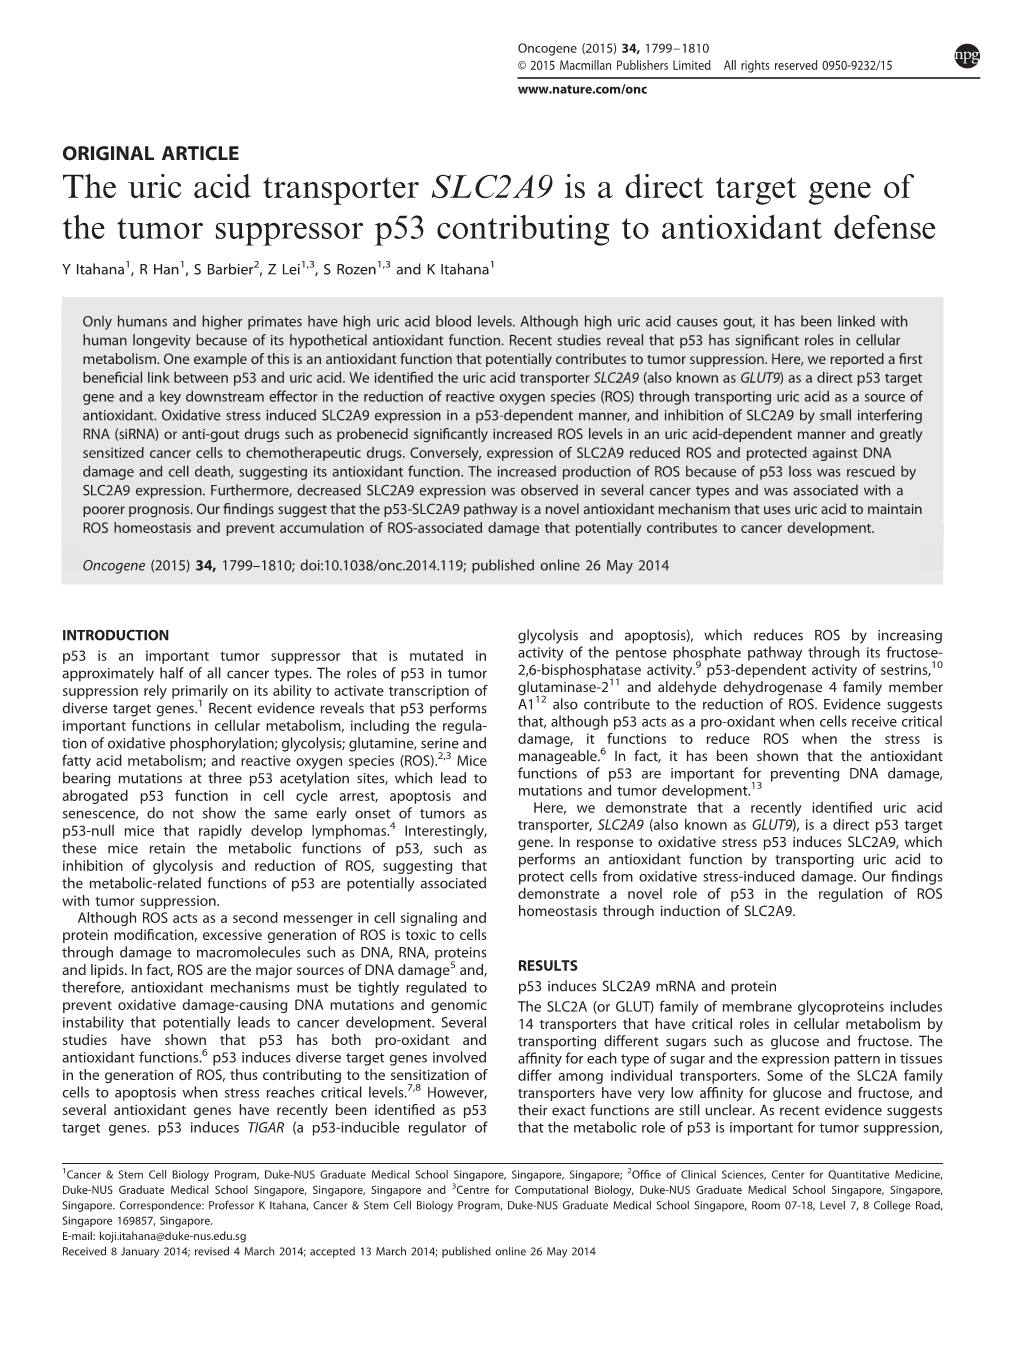 The Uric Acid Transporter SLC2A9 Is a Direct Target Gene of the Tumor Suppressor P53 Contributing to Antioxidant Defense